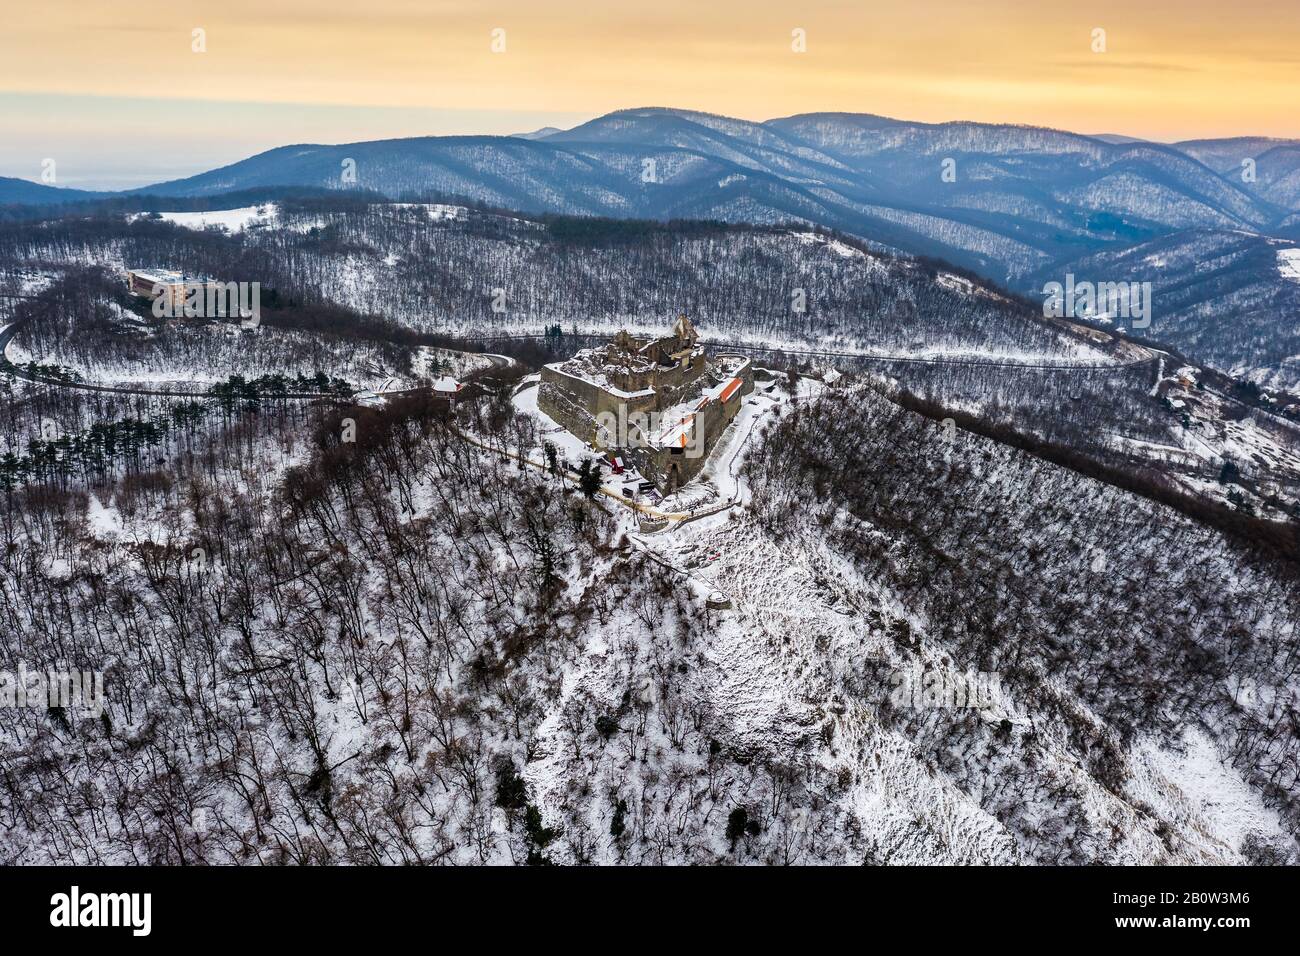 Visegrad, Hungary - Aerial panoramic view of the beautiful old and snowy high castle of Visegrad at sunrise on a winter morning with the hills of Pili Stock Photo